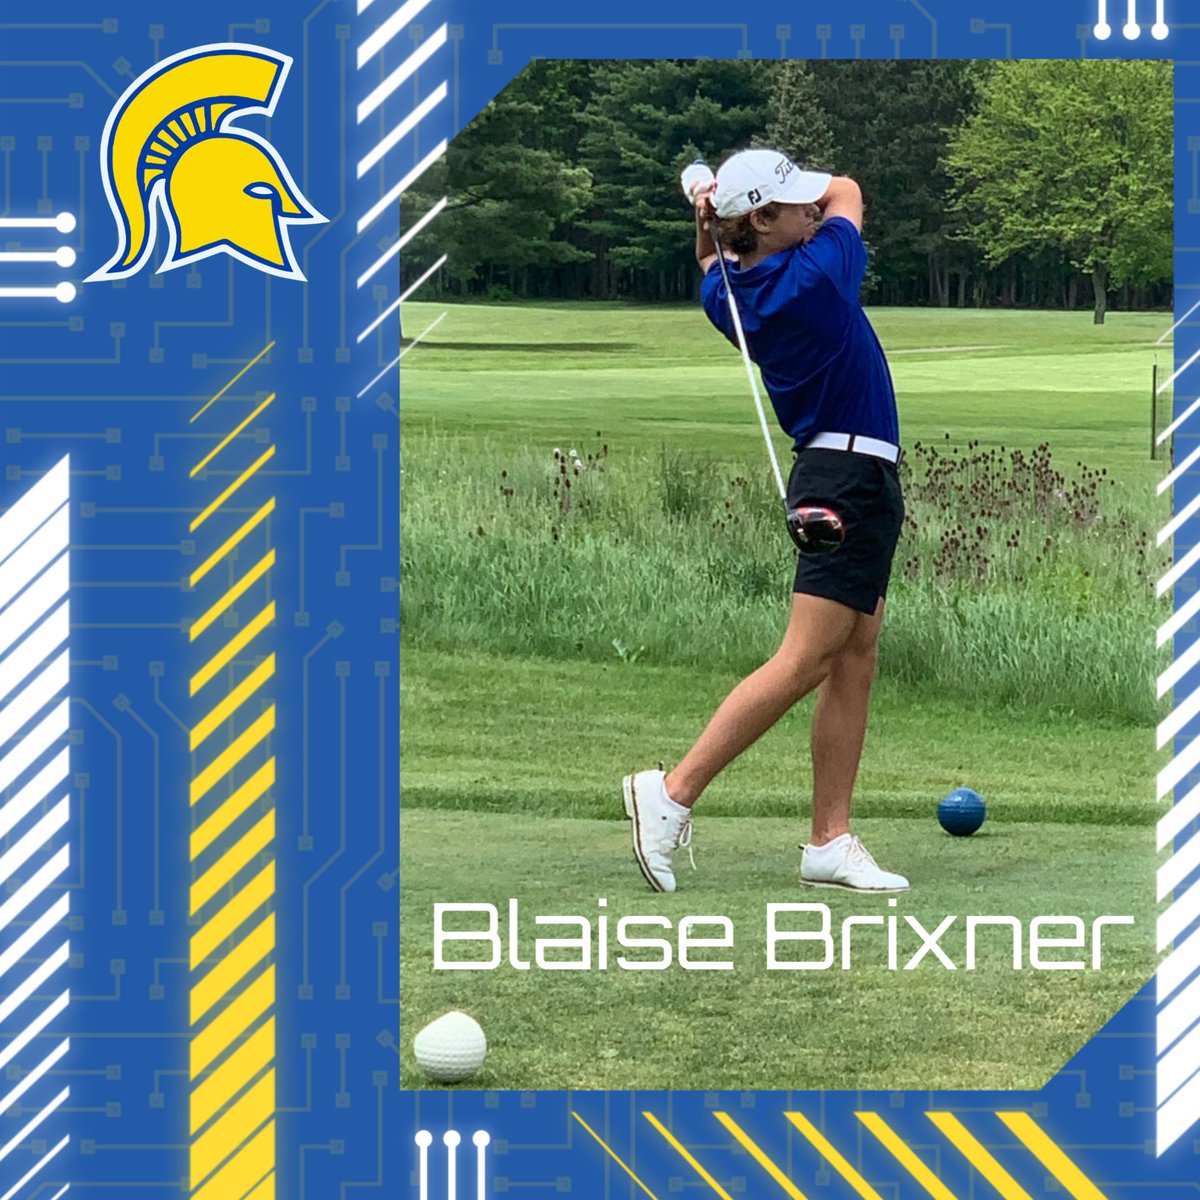 Wishing the best of luck to Blaise Brixner as he competes at the NYSPHSAA State Championship on June 2nd and 3rd! You've got this! 💪#NYStateChampionships #GoBlaise #GOSPRTANS @MECSDSpartans @MGeraldWilson @MESpartan300  
📆6/2 & 6/3
📍Mark Twain Golf Course - Elmira